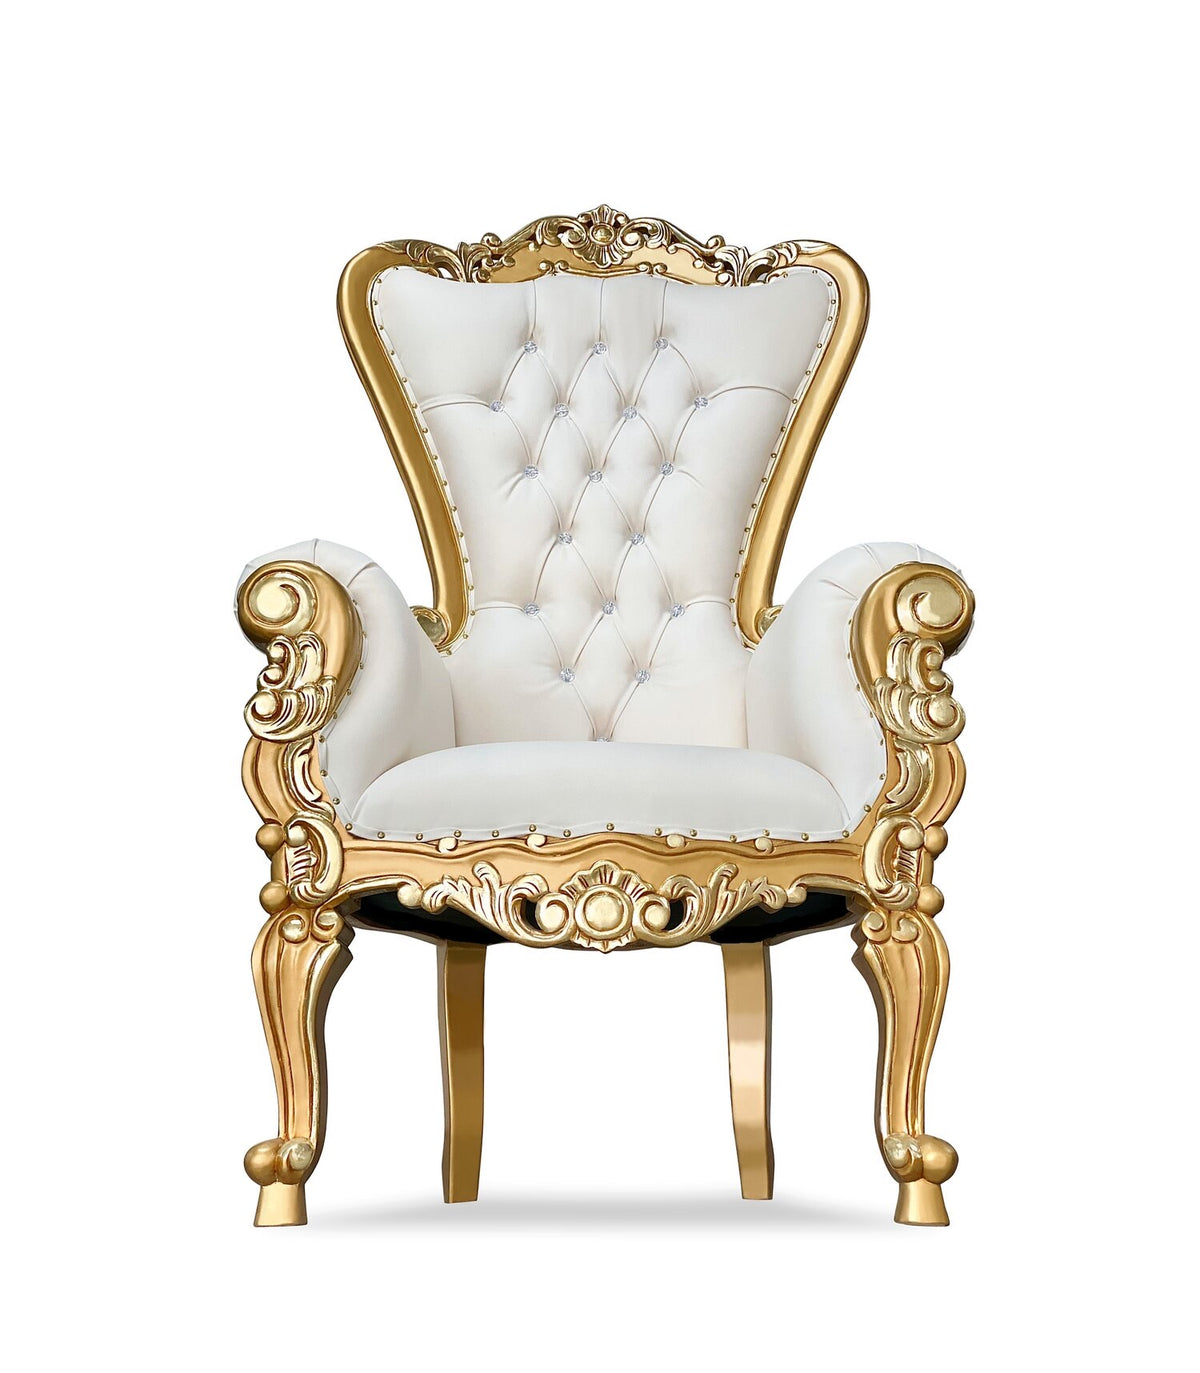 Gold & White Adult Royal Chair